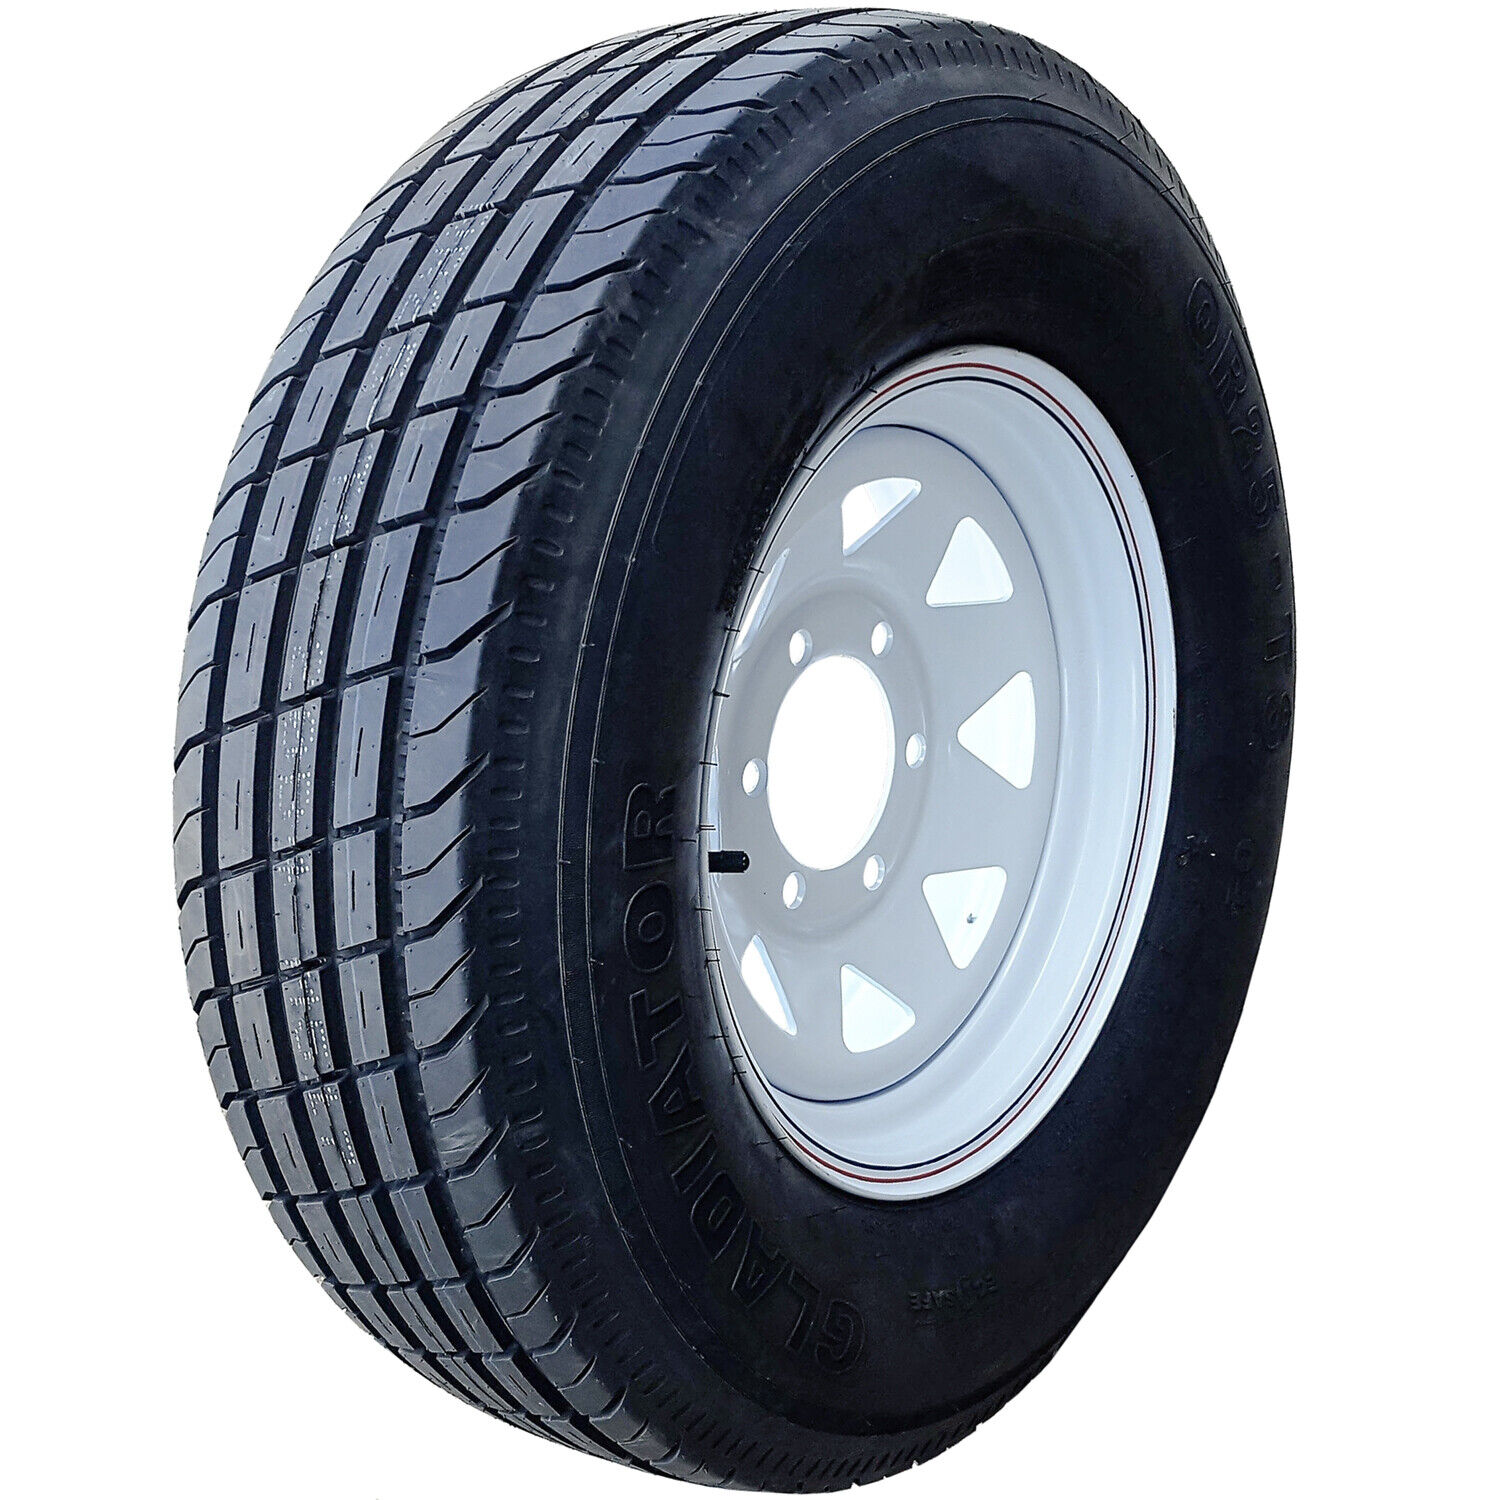 Tire Gladiator QR25-TS Steel Belted ST 225/90R16 225-90-16 G 14 Ply Trailer